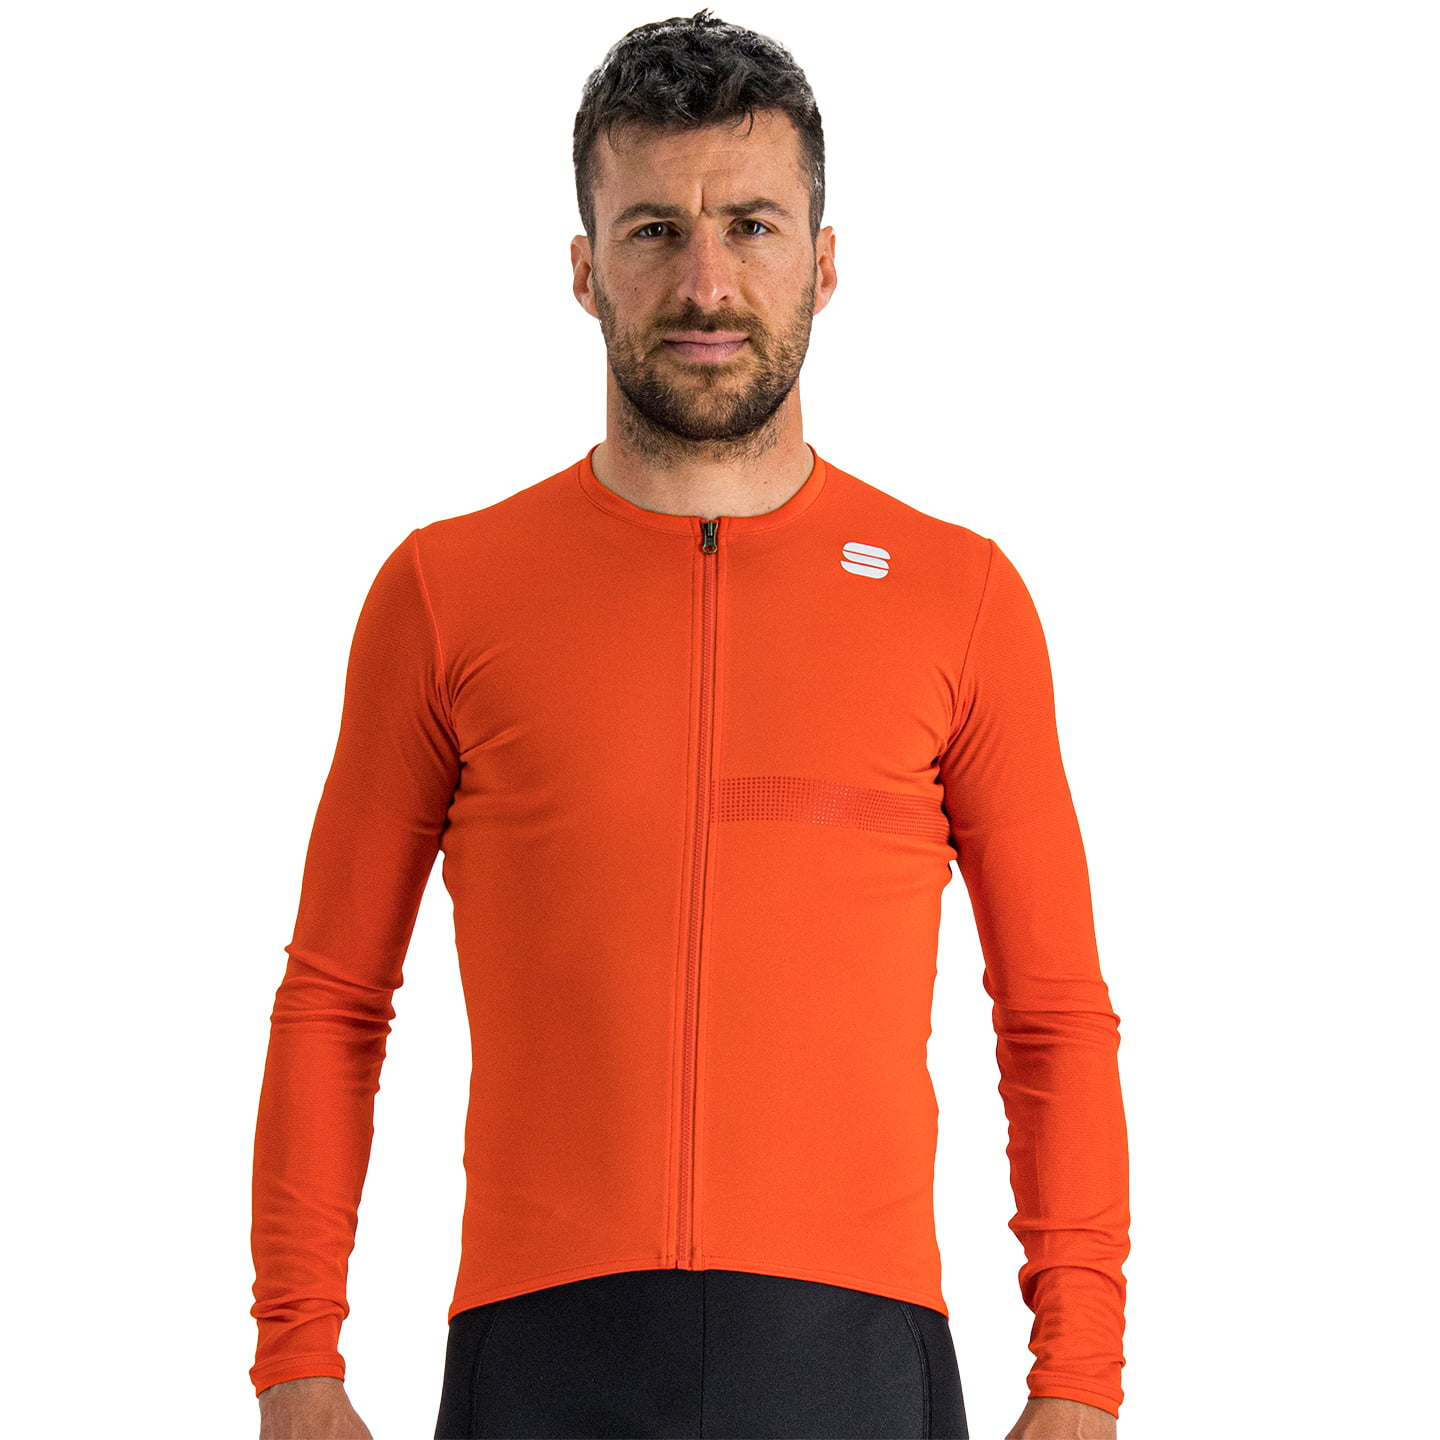 SPORTFUL Matchy Long Sleeve Jersey Long Sleeve Jersey, for men, size M, Cycling jersey, Cycling clothing